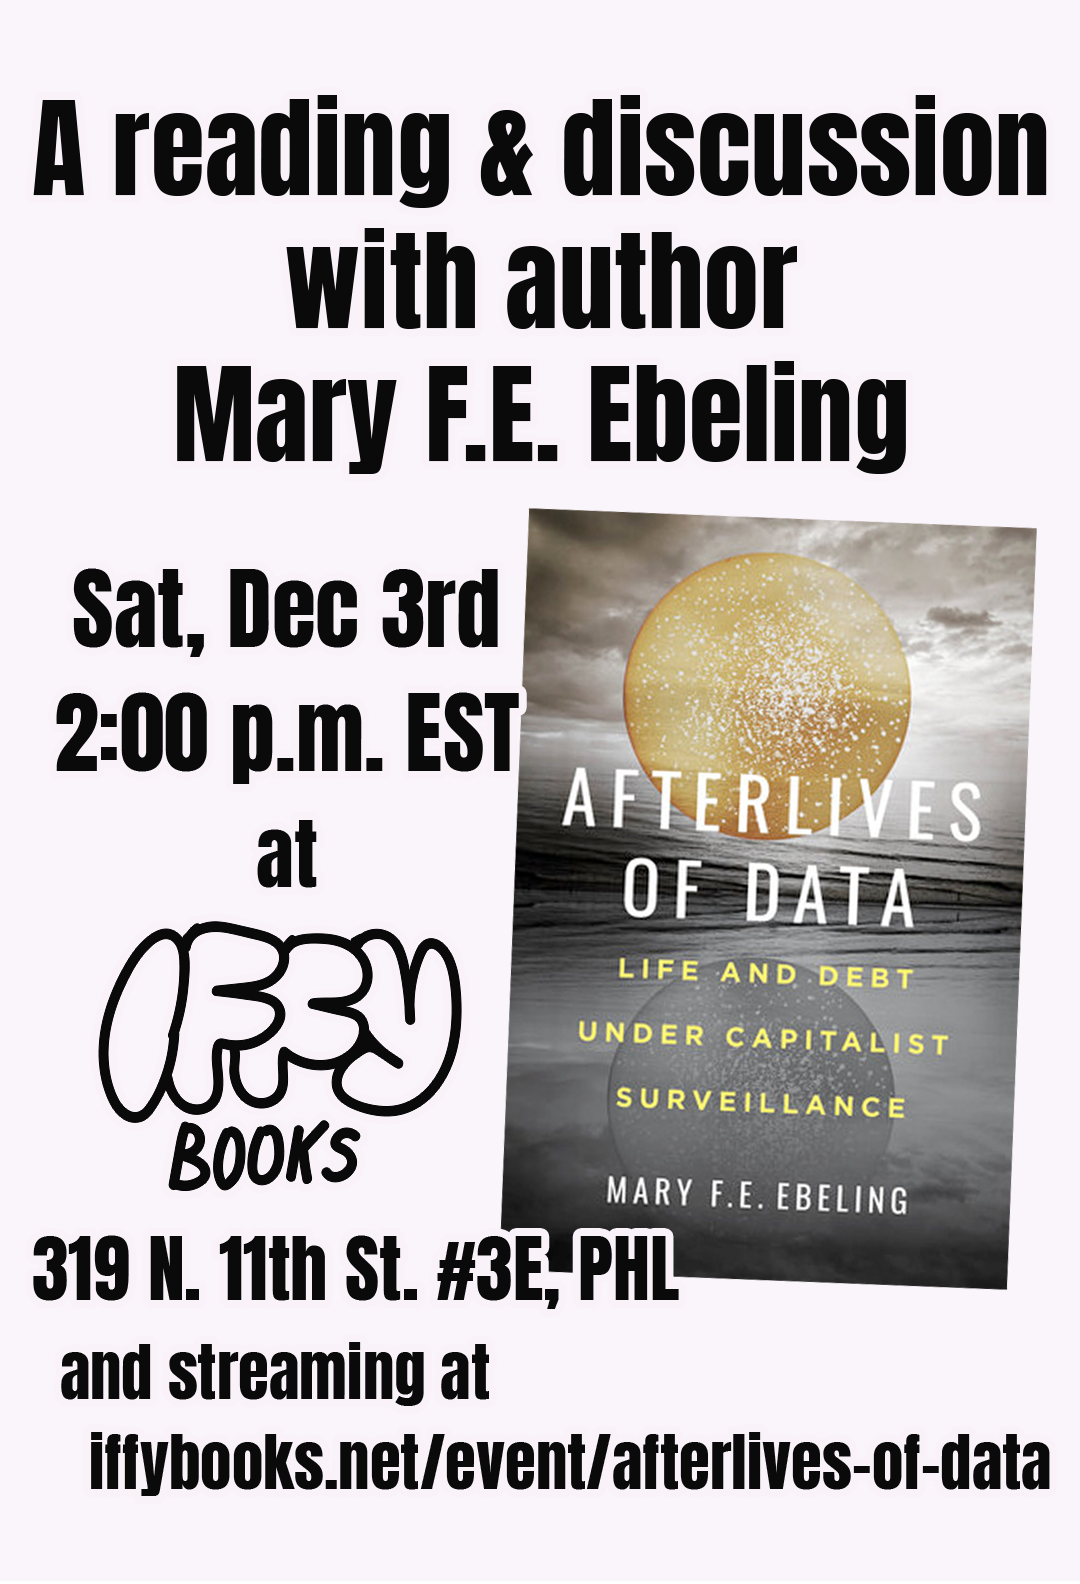 Flyer image with the cover of the book 'Afterlives of Data: Life and Debt Under Capitalist Surveillance', with the following text: A reading & discussion with author Mary F.E. Ebeling Sat, Dec 3rd 2:00 p.m. EST at Iffy Books 319 N. 11th St. #3E, PHL and streaming at iffybooks.net/event/afterlives-of-data